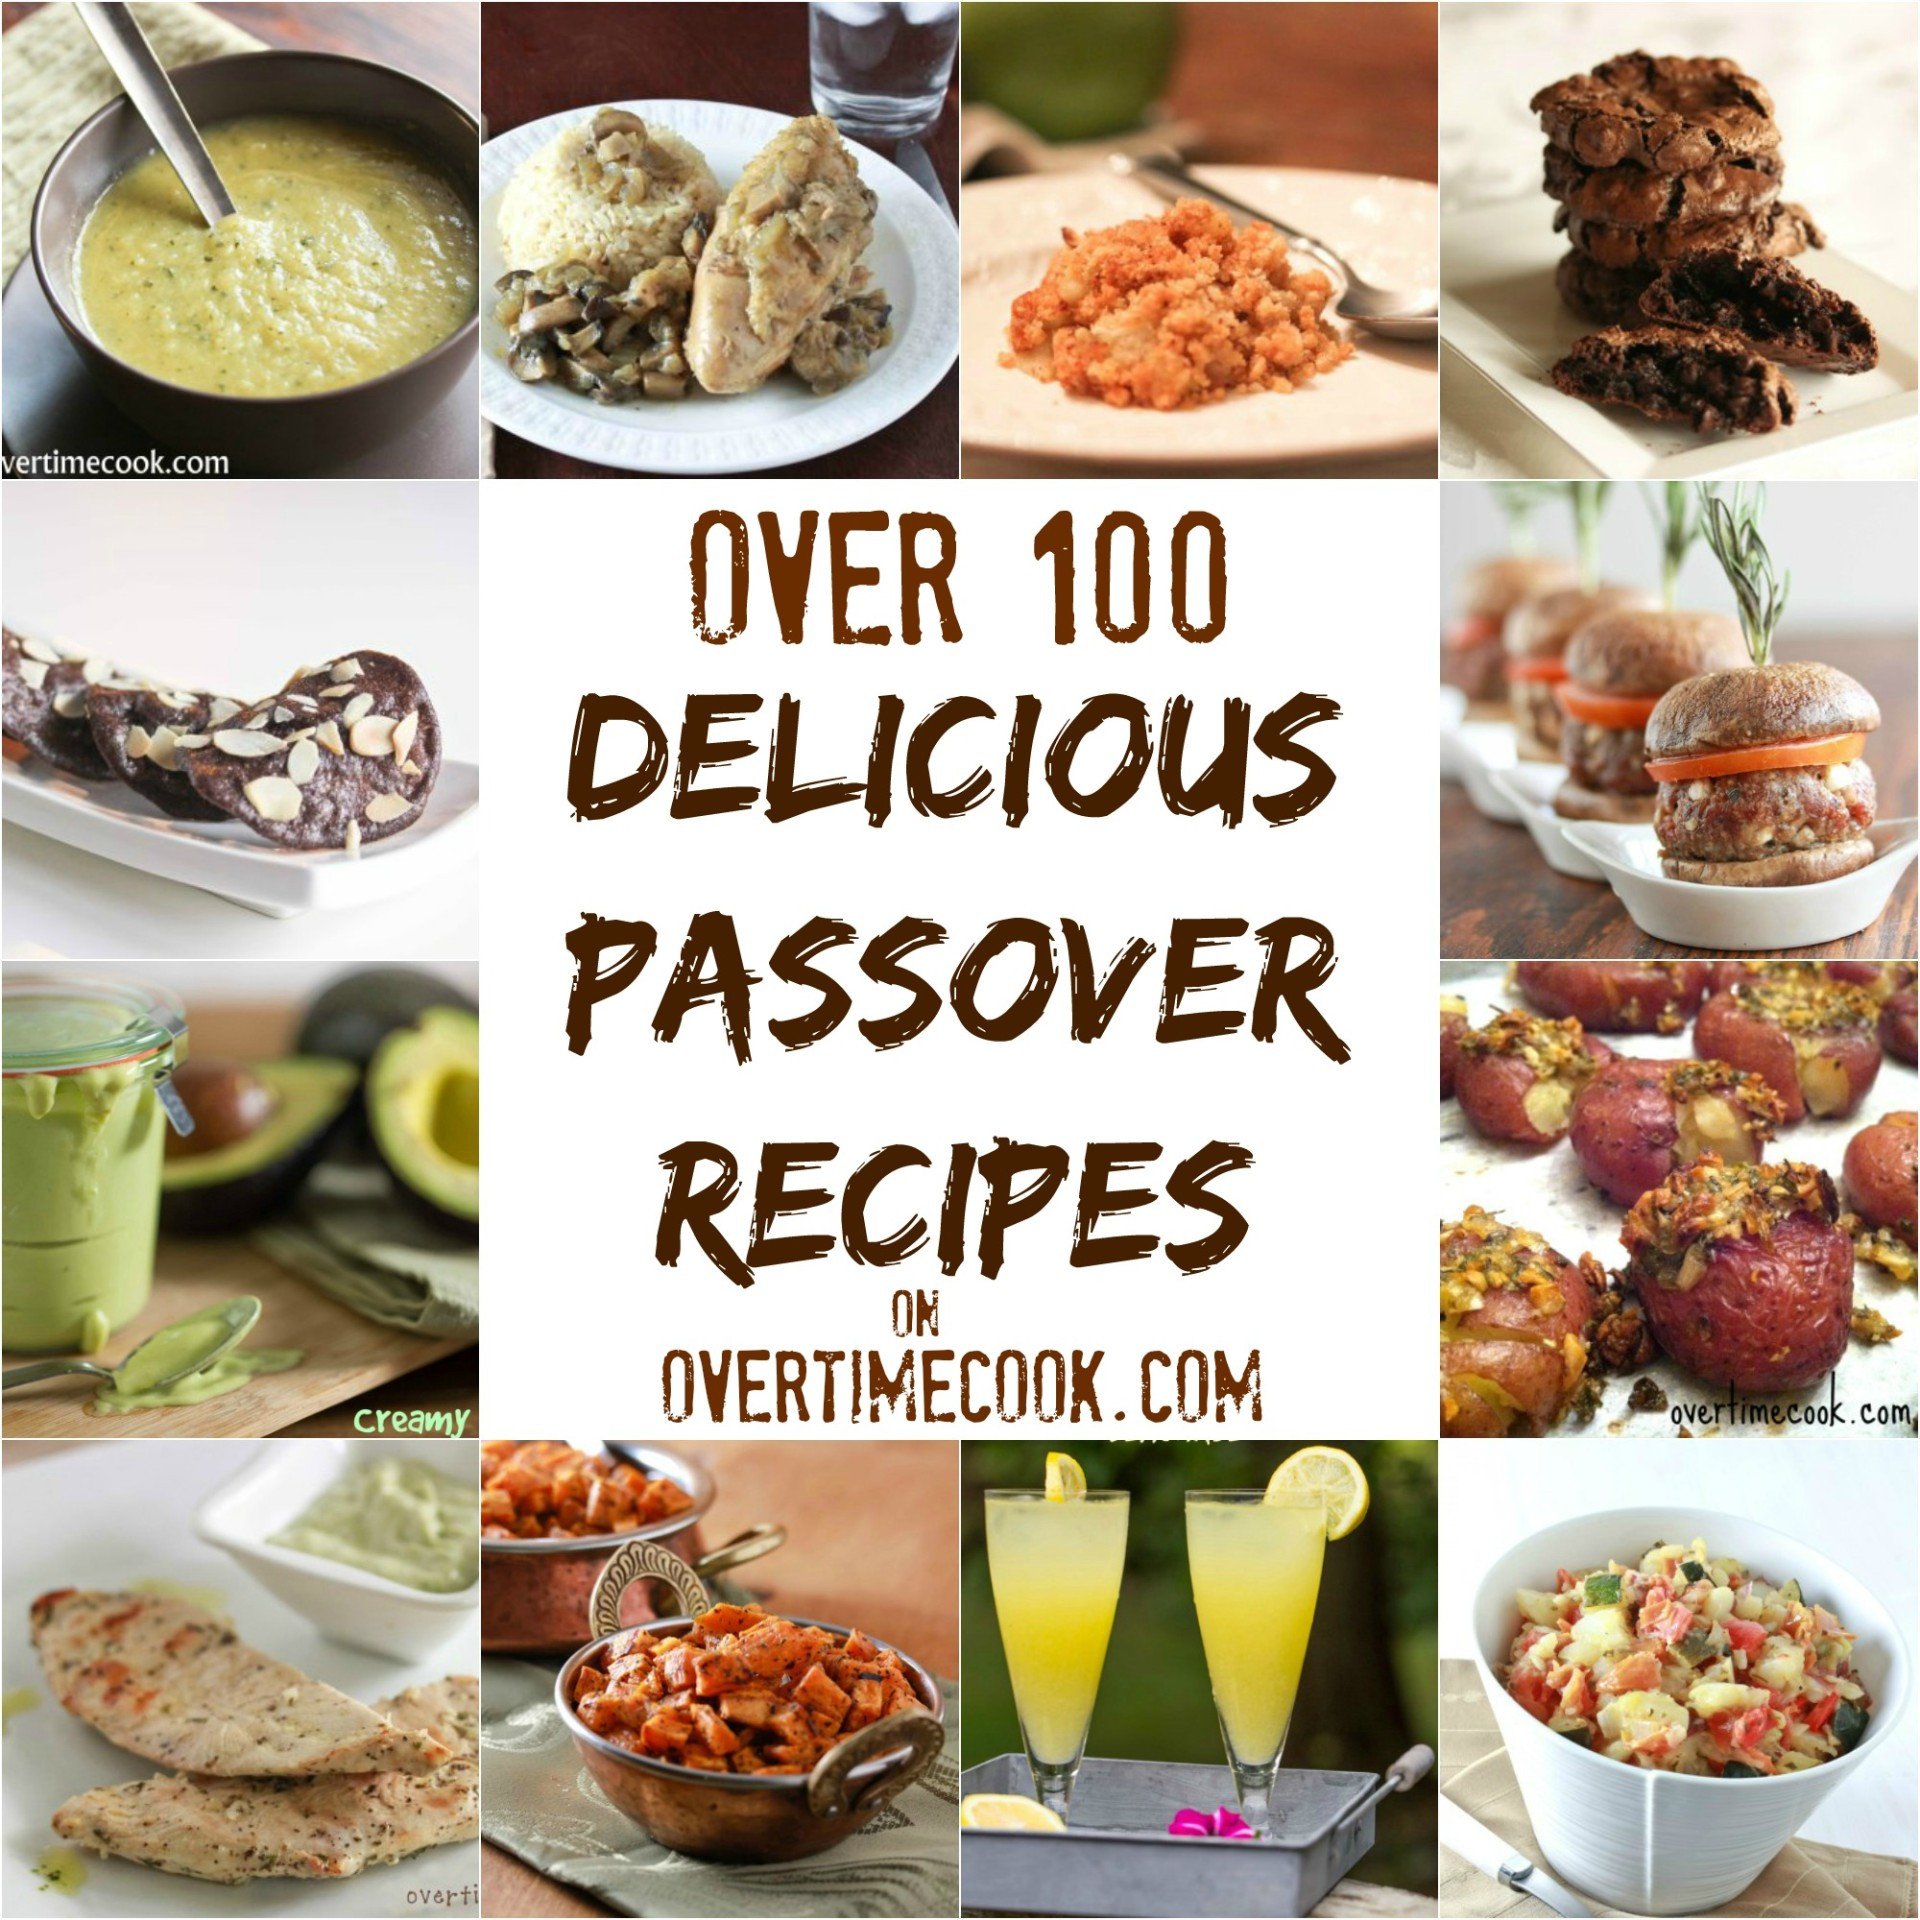 Passover Food
 Over 100 Delicious Passover Recipes Overtime Cook